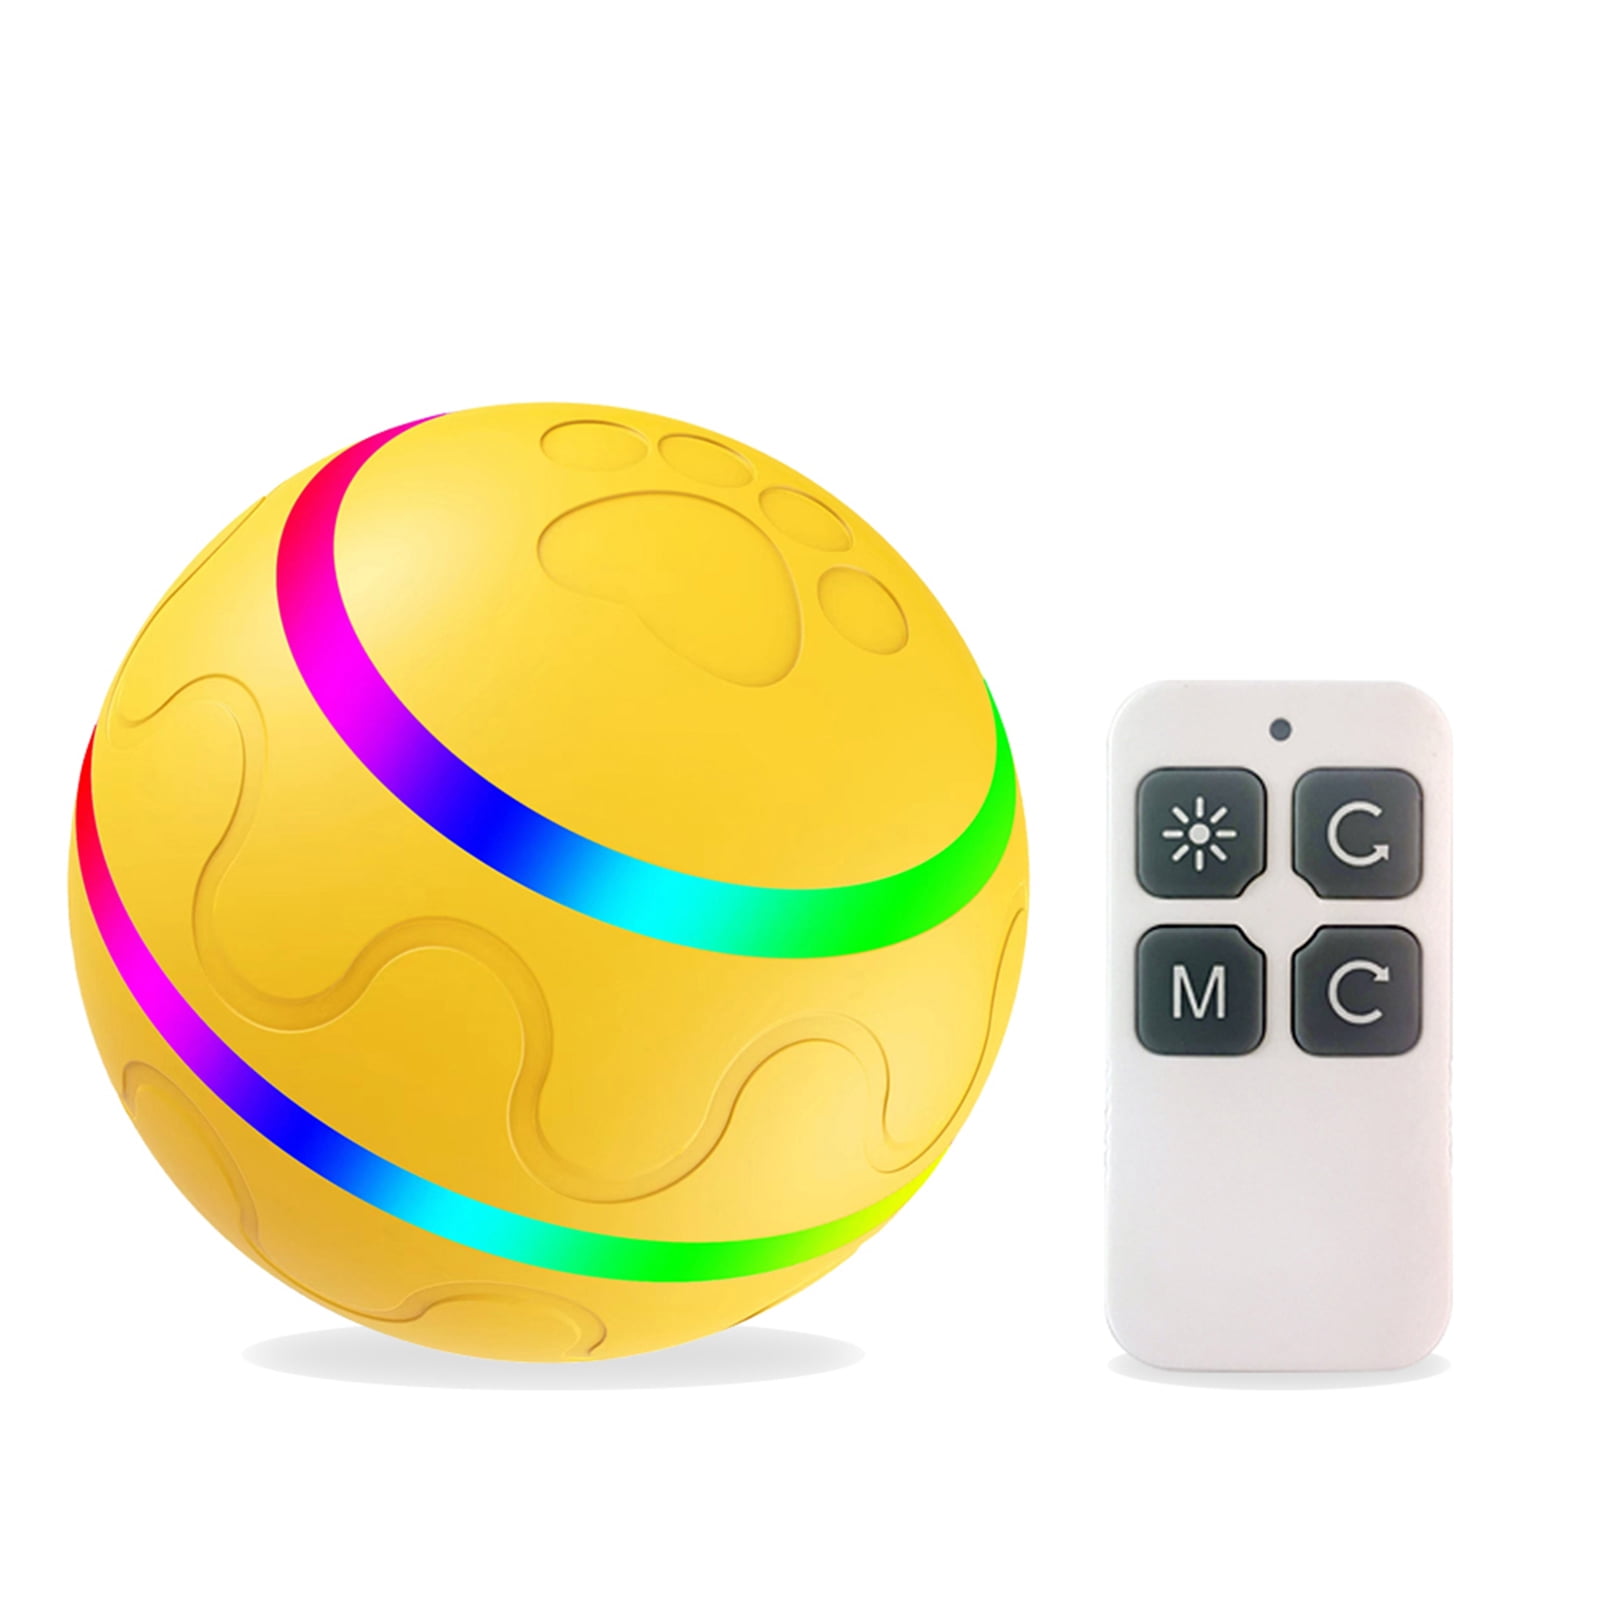 Ayvfirex Interactive Dog Toys for Boredom and Stimulating, Remote Control  LED Lights Dog Balls Active Rolling Ball for Dogs, IPX6 Waterproof Moving